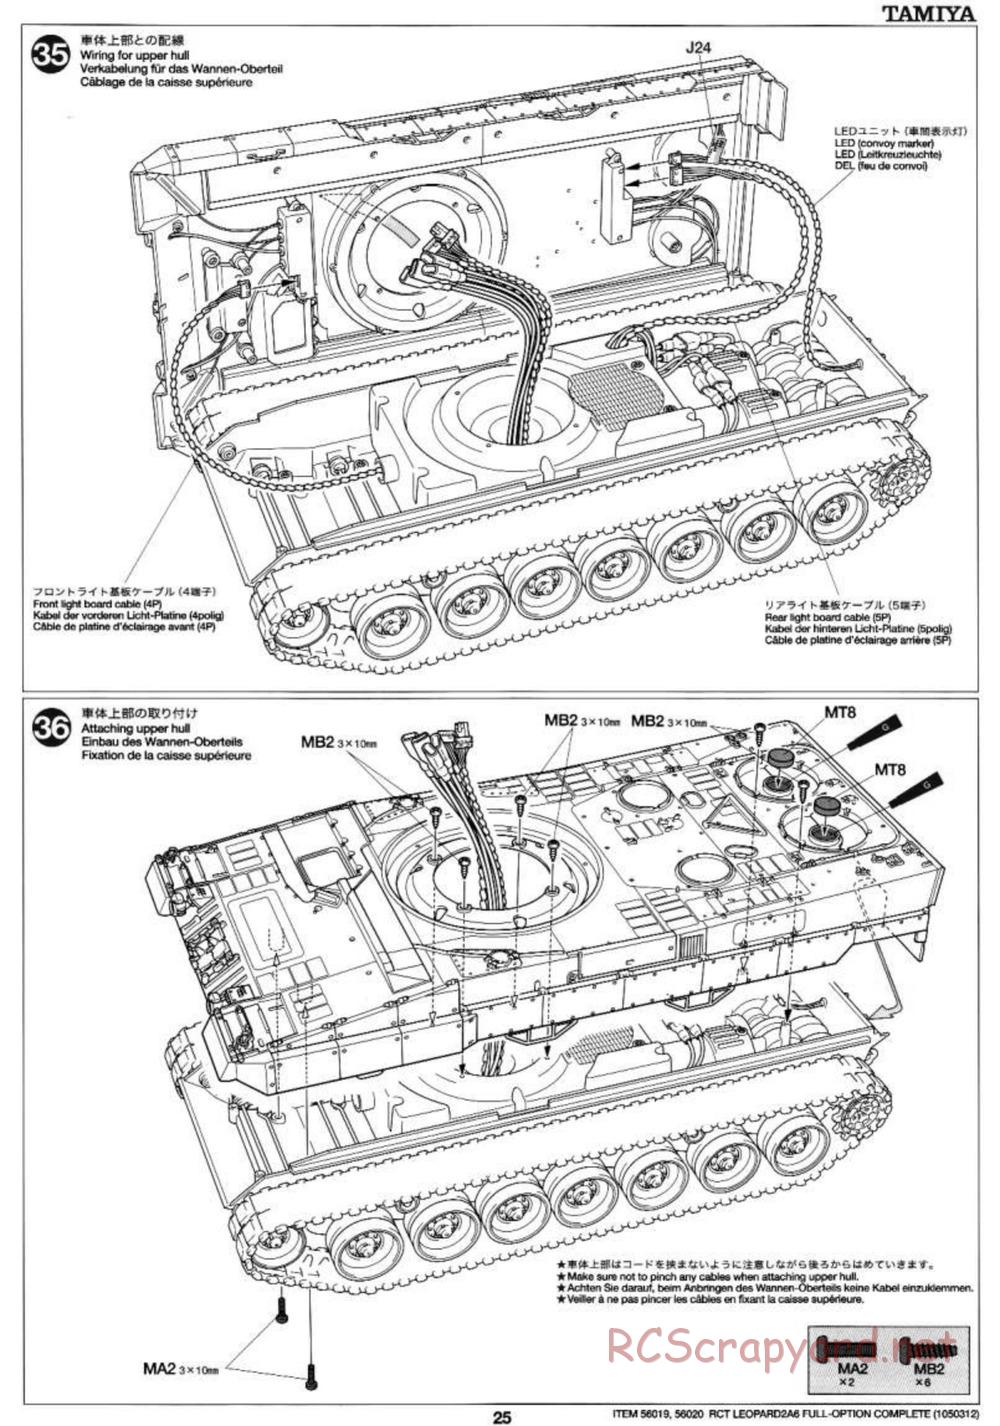 Tamiya - Leopard 2 A6 - 1/16 Scale Chassis - Manual - Page 25